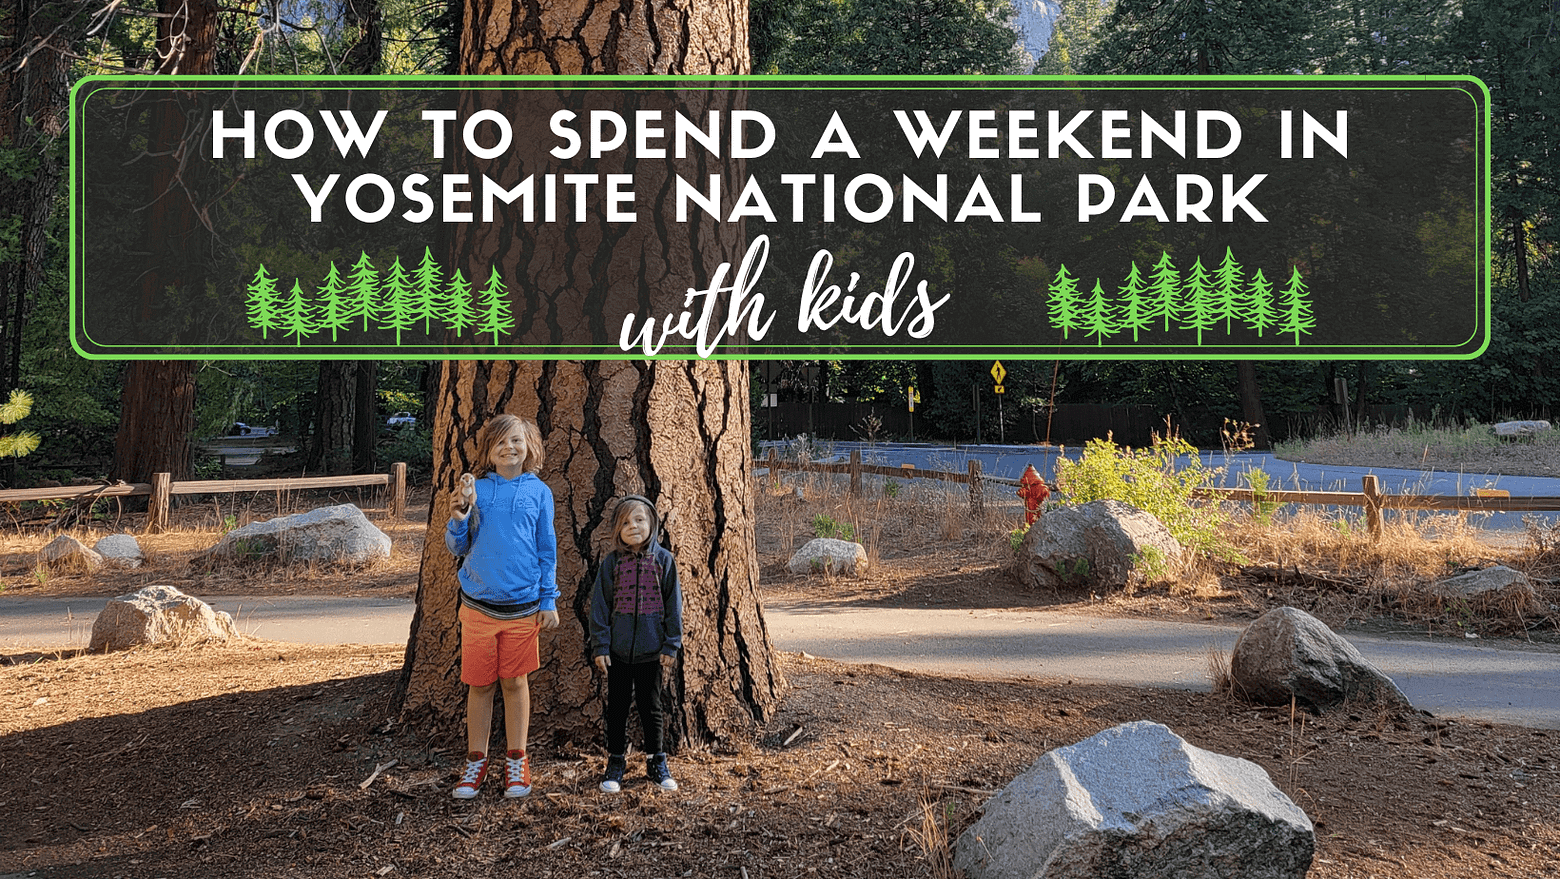 How To Spend A Weekend At Yosemite National Park